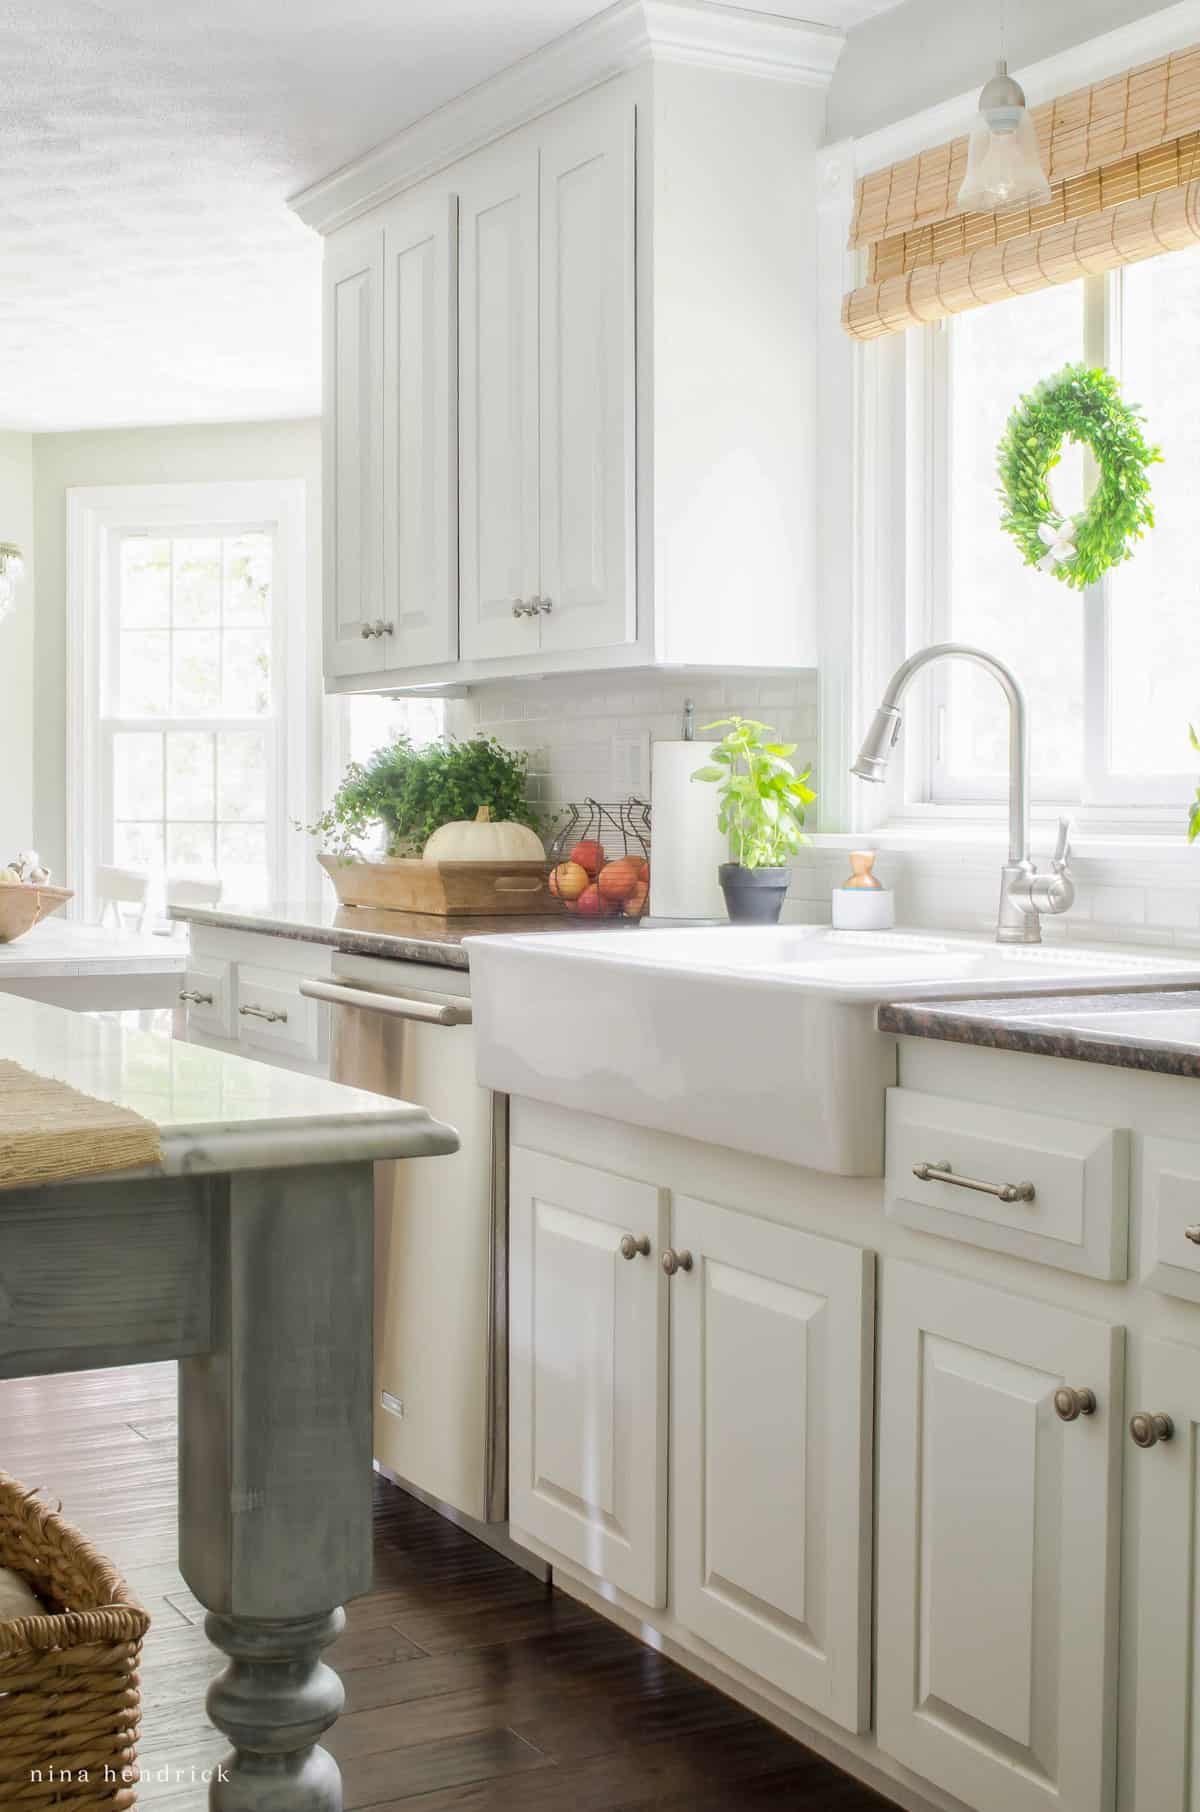 A white kitchen with wood floors and a sink.